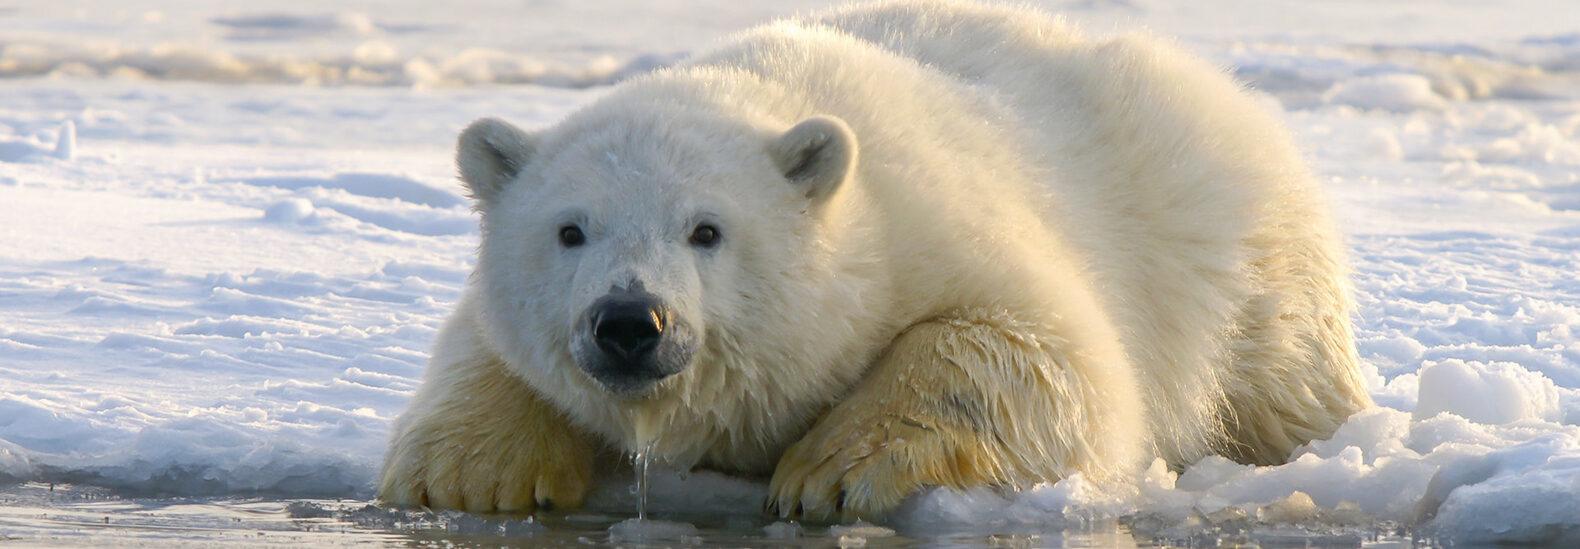 Polar bears get a big win as court dismisses Arctic oil drilling project